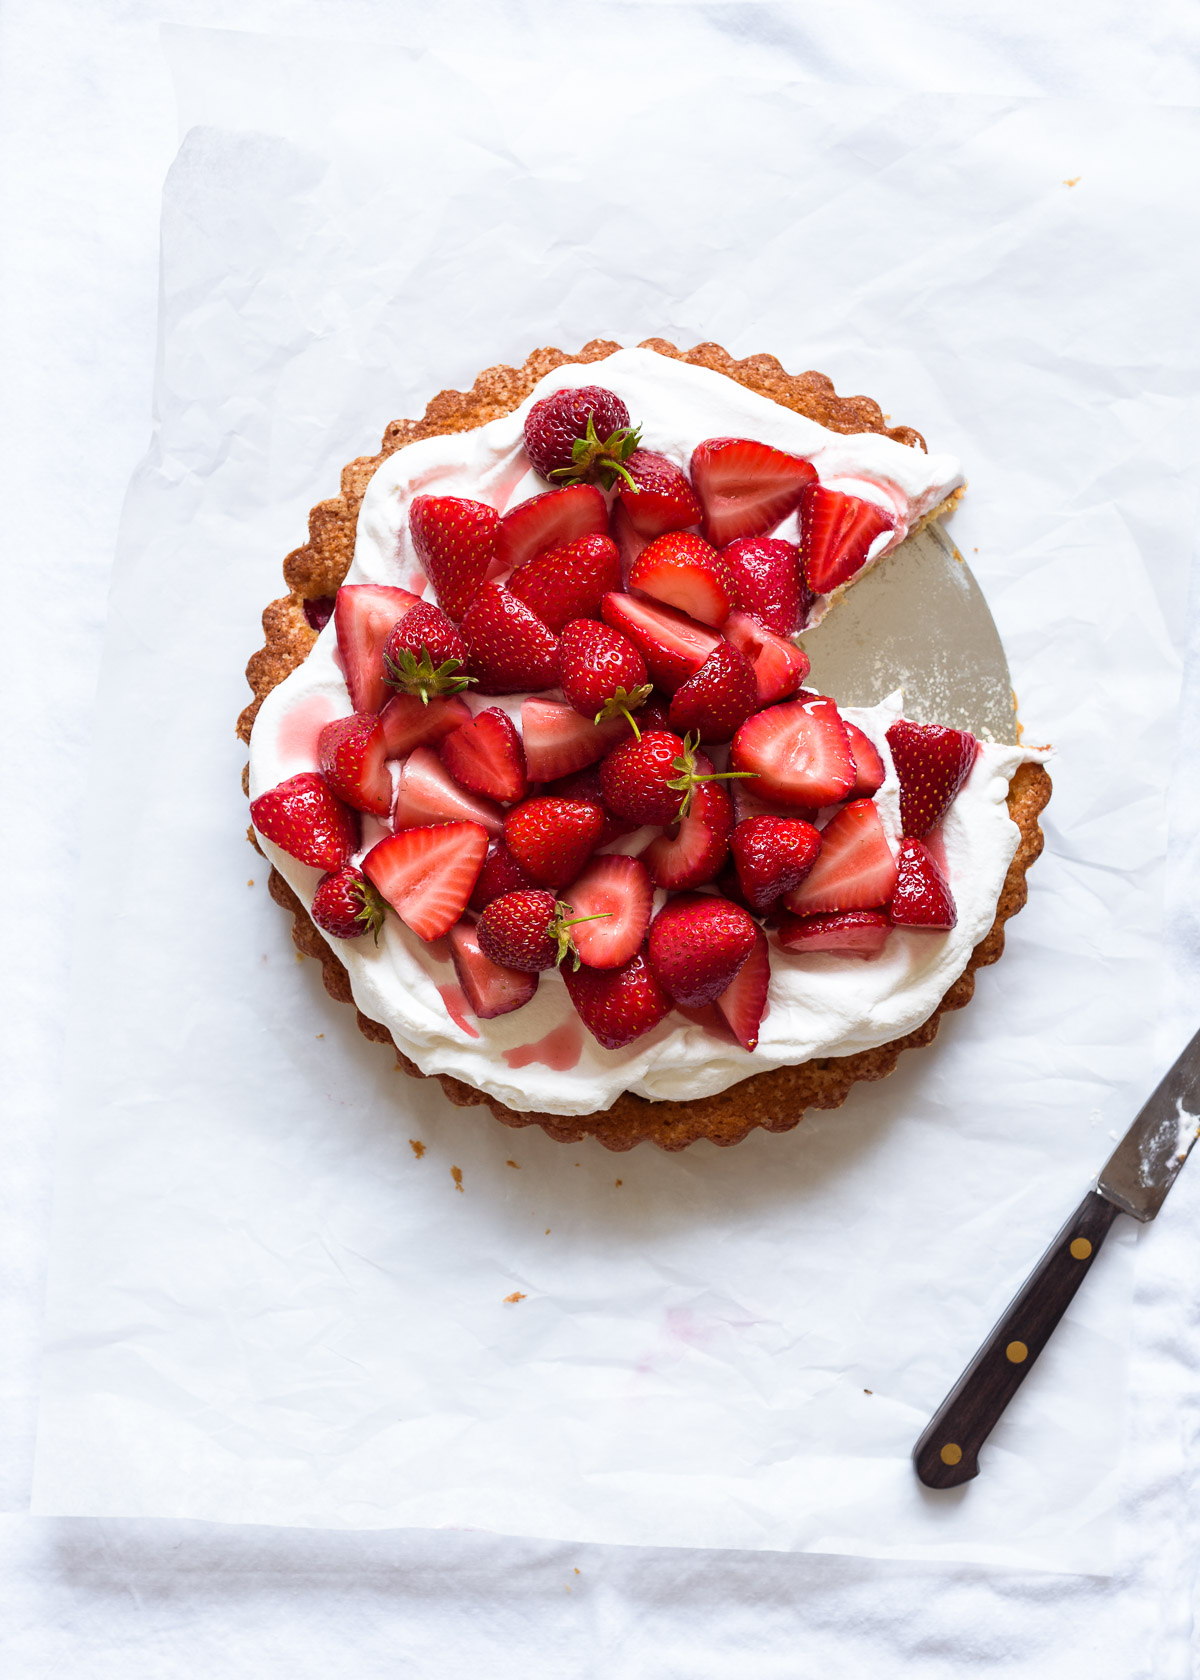 A strawberry almond buttermilk cake with whipped cream and macerated strawberries on a white background.